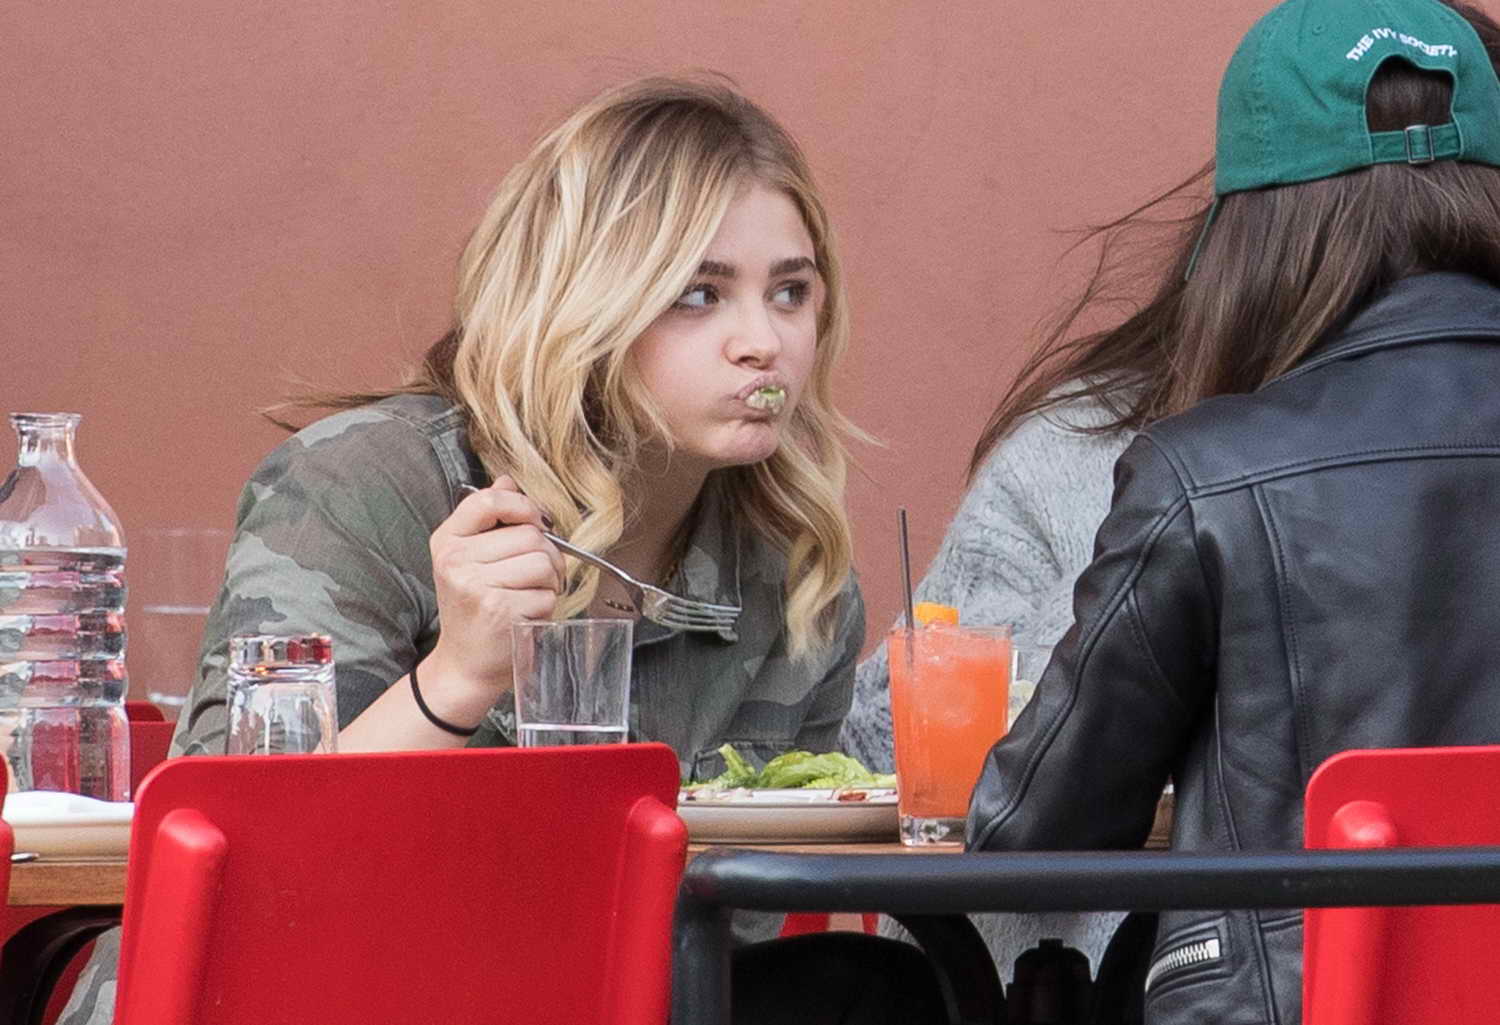 Chloe Grace Moretz Out and About in SoHo 05/08/2016.